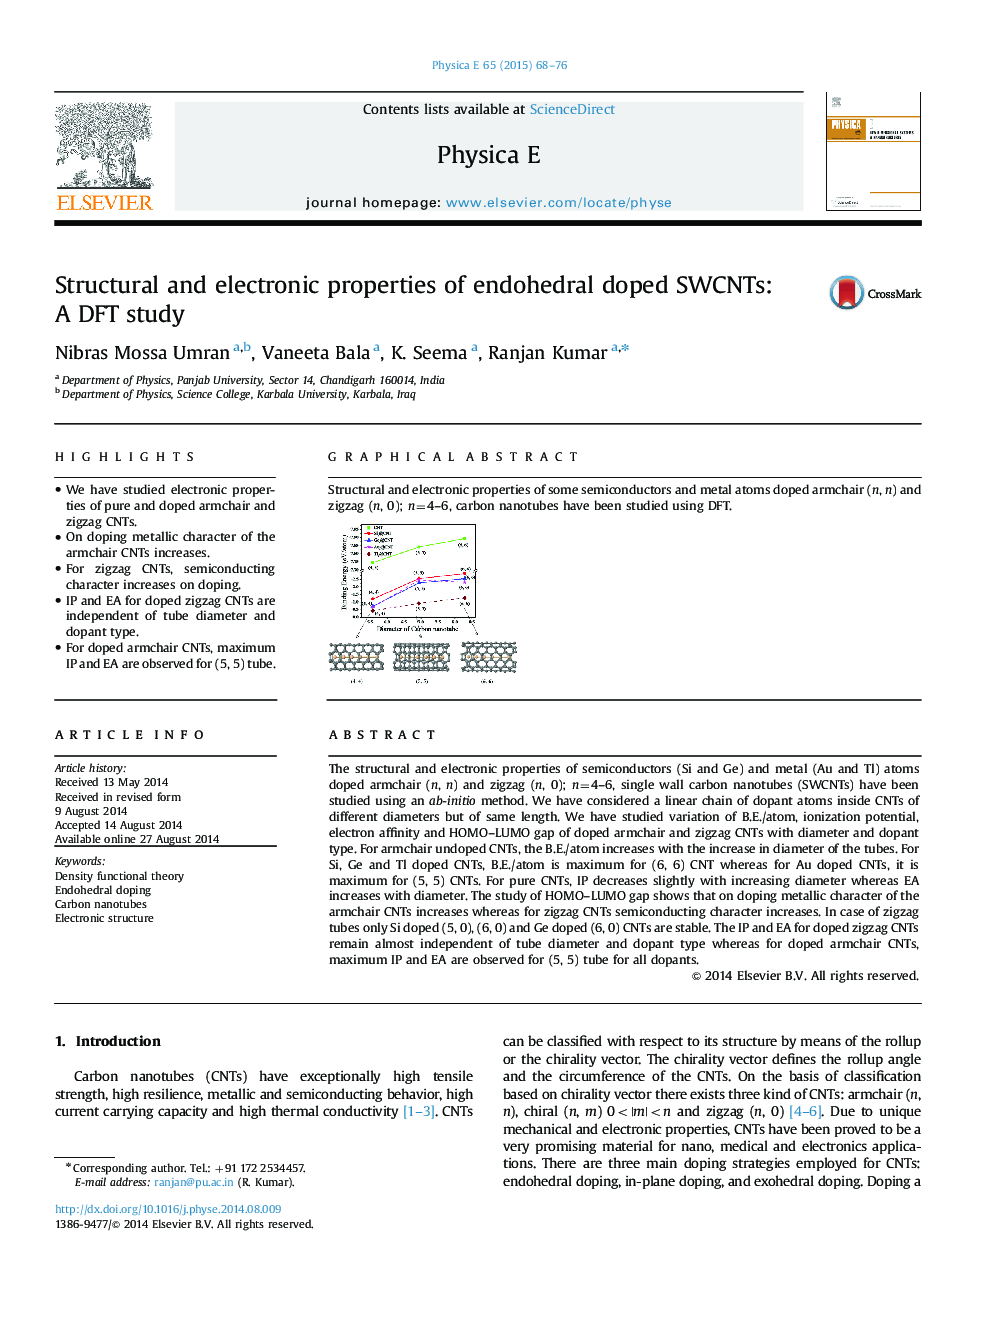 Structural and electronic properties of endohedral doped SWCNTs: A DFT study